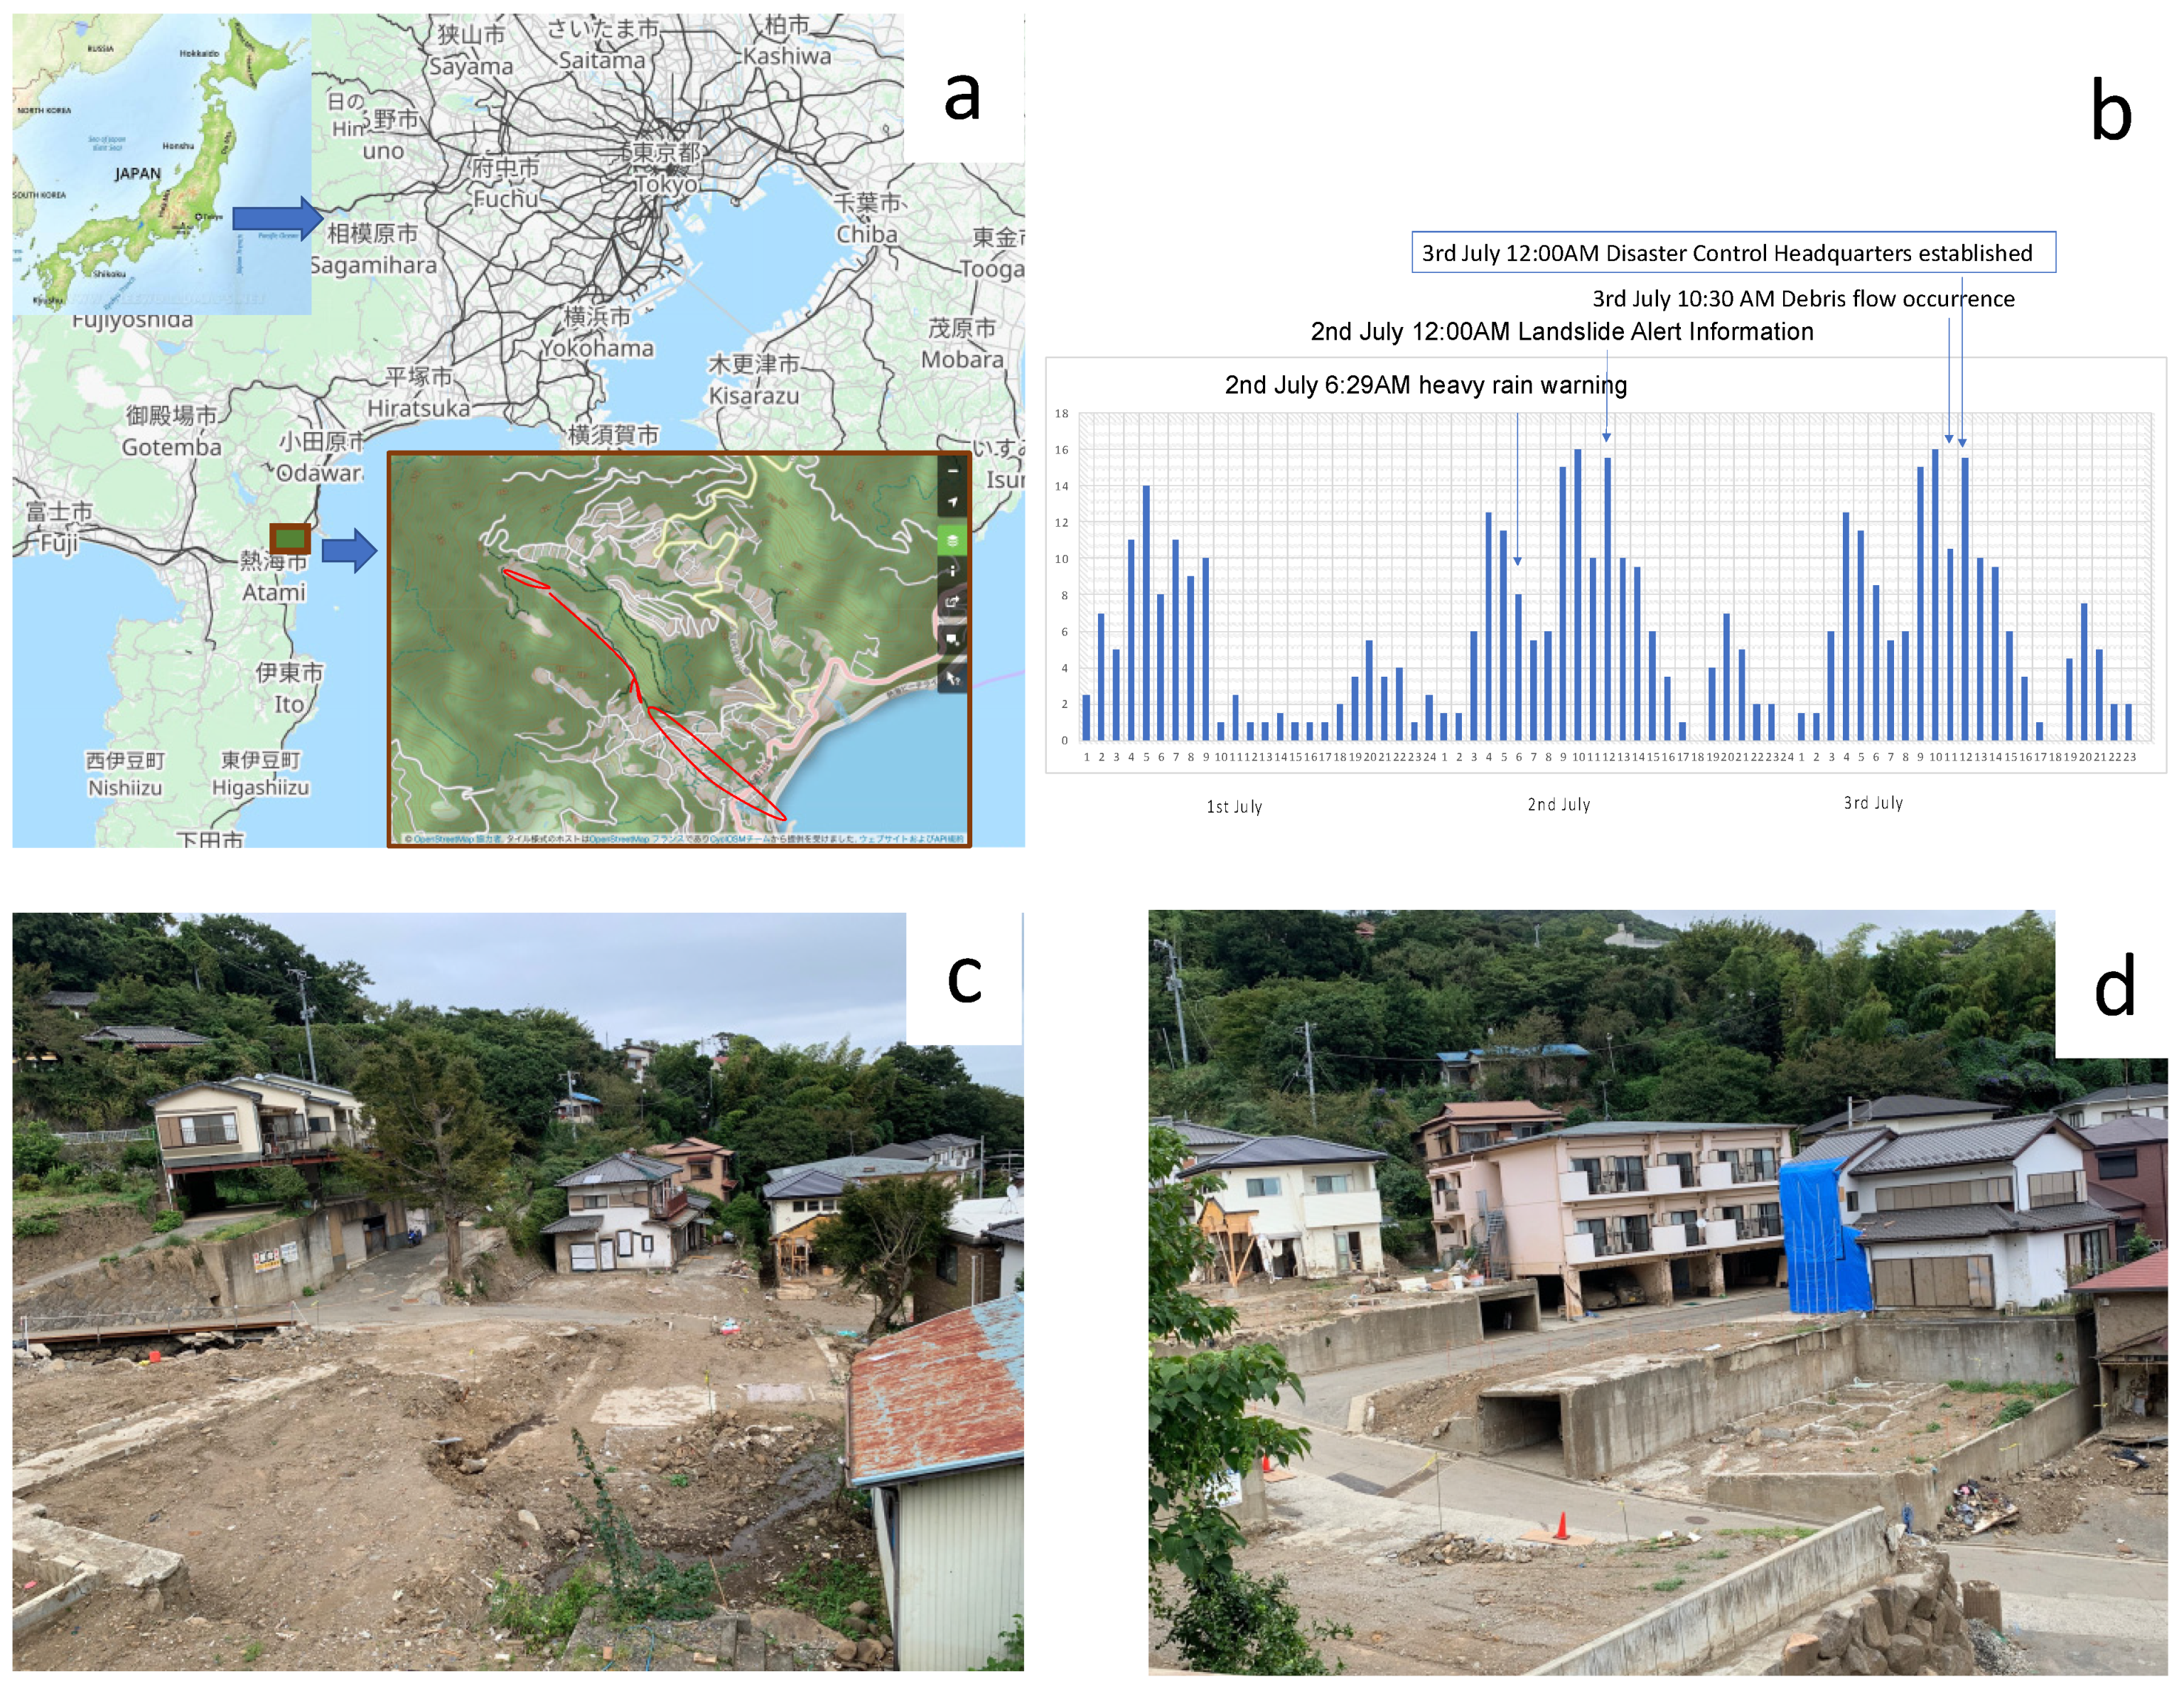 Sustainability Free Full-Text Disaster Risk Reduction Regime in Japan An Analysis in the Perspective of Open Data, Open Governance